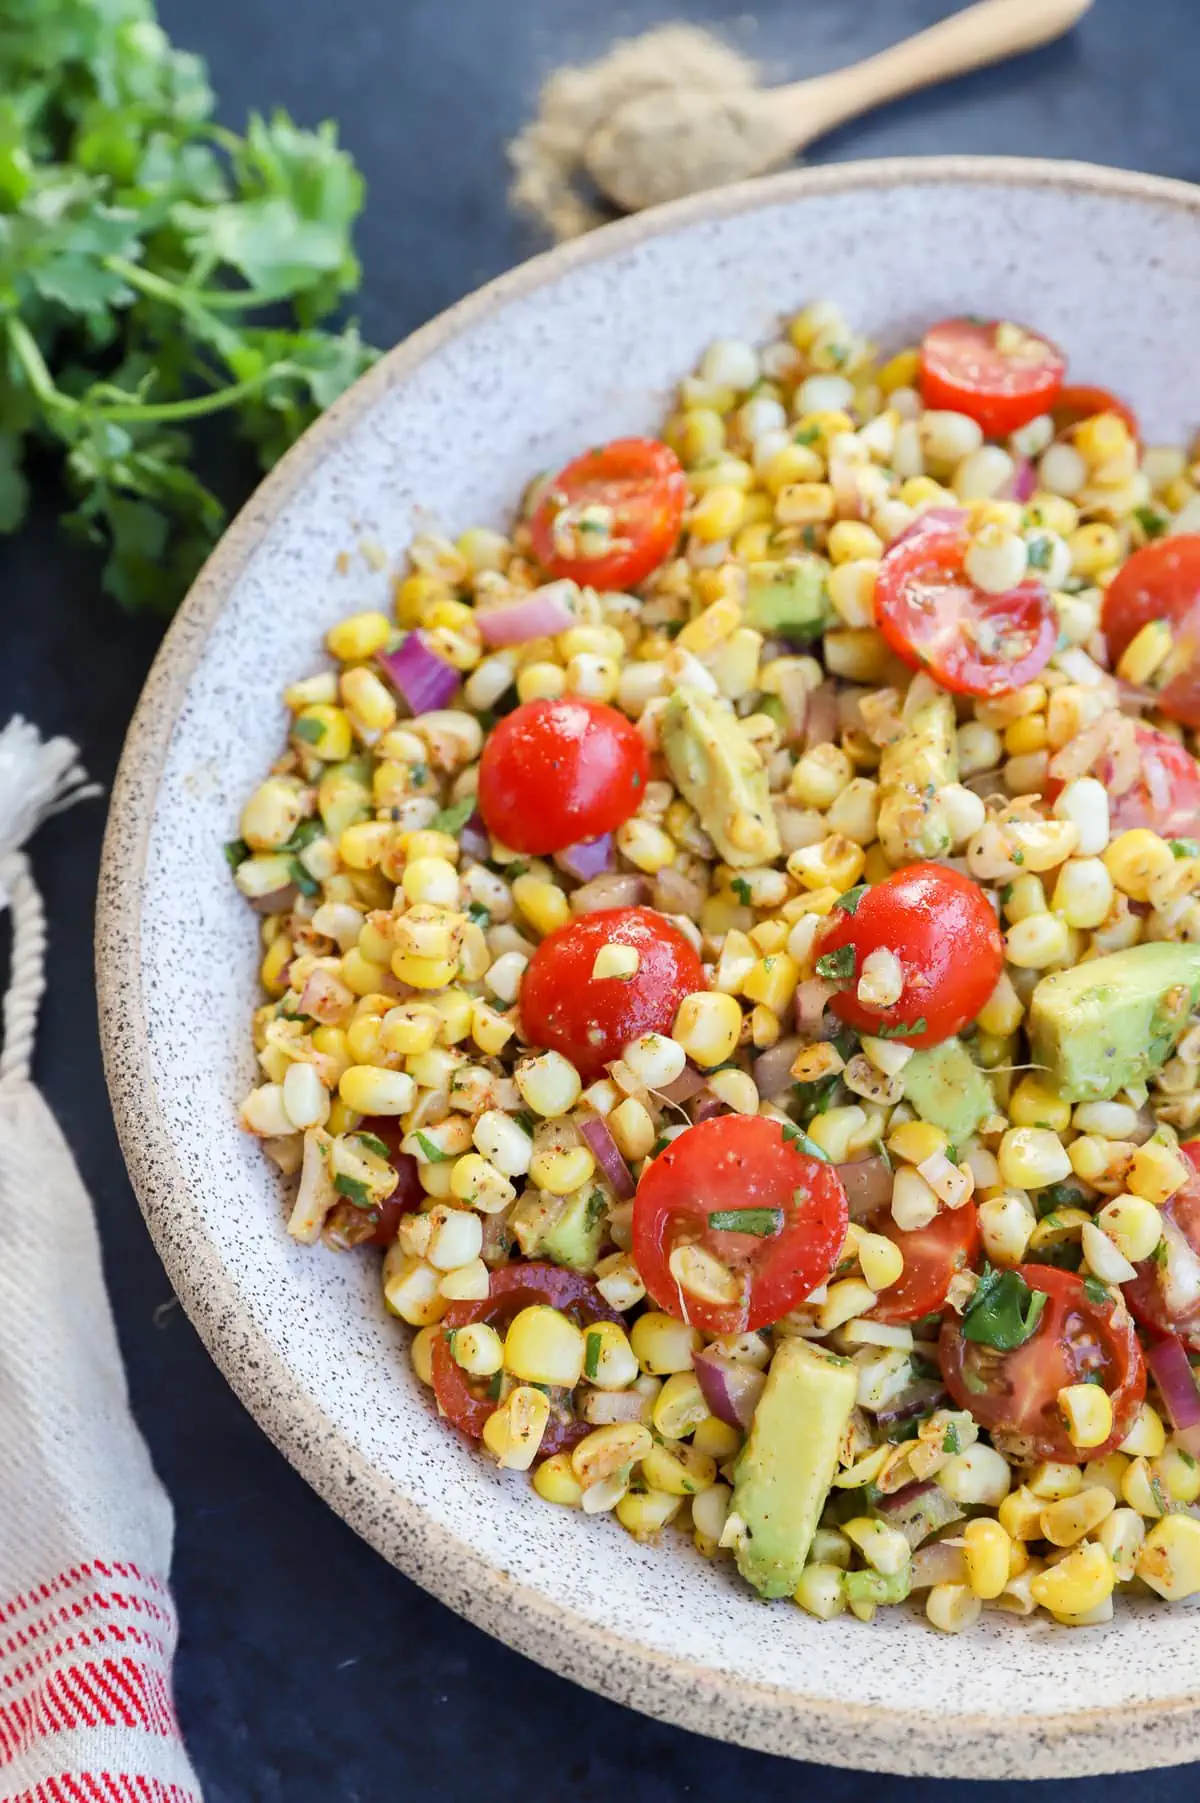 Masala corn salad in a bowl with tomatoes and avocado photo